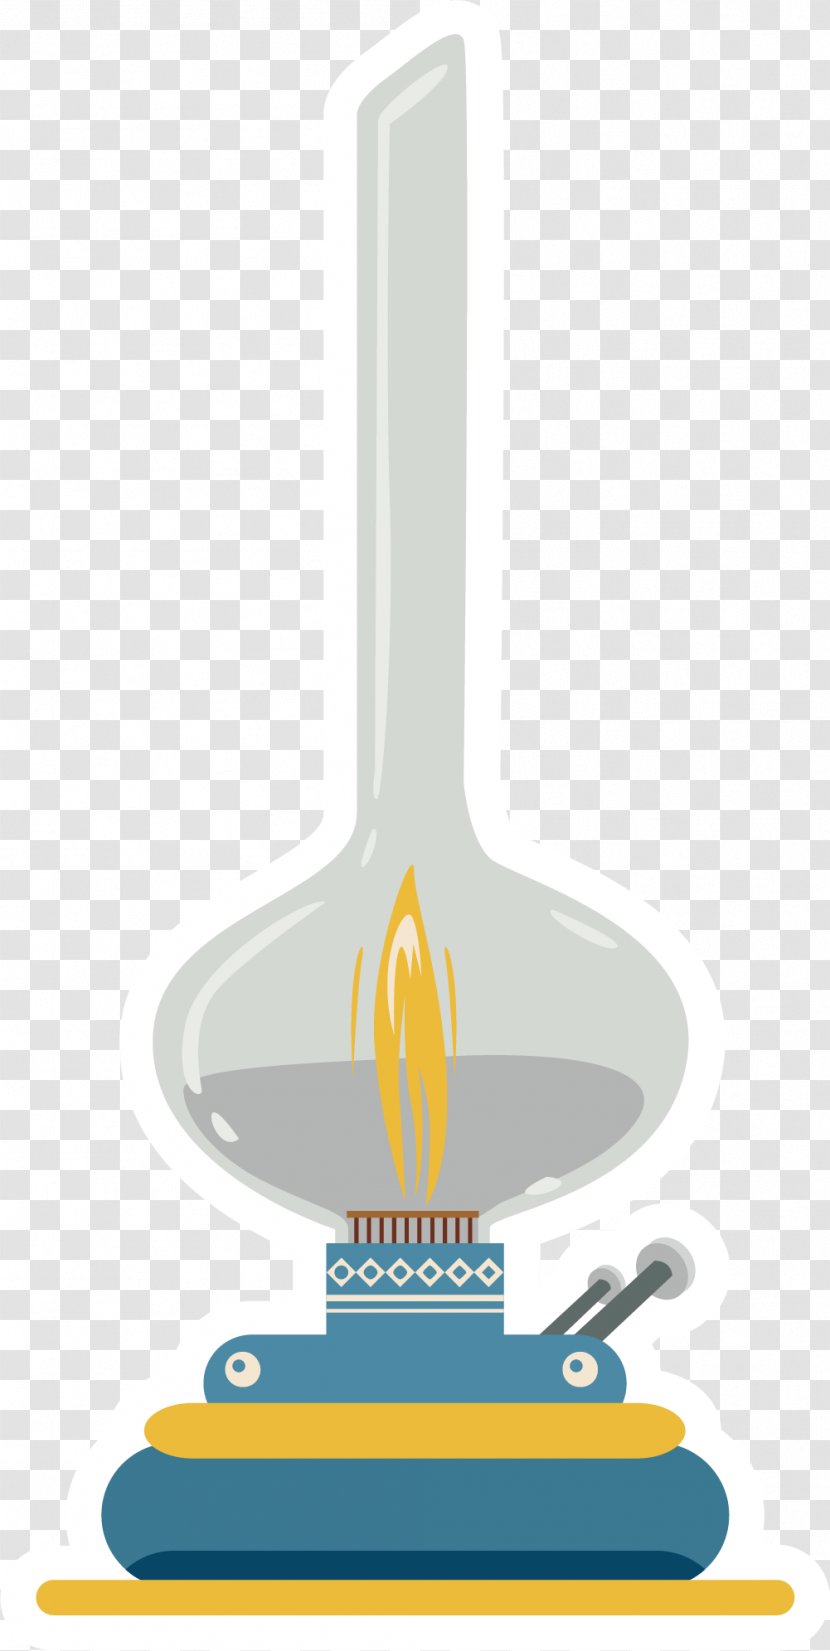 Candlestick Oil Lamp - Blue - Simple For Eid UL Fitr Transparent PNG